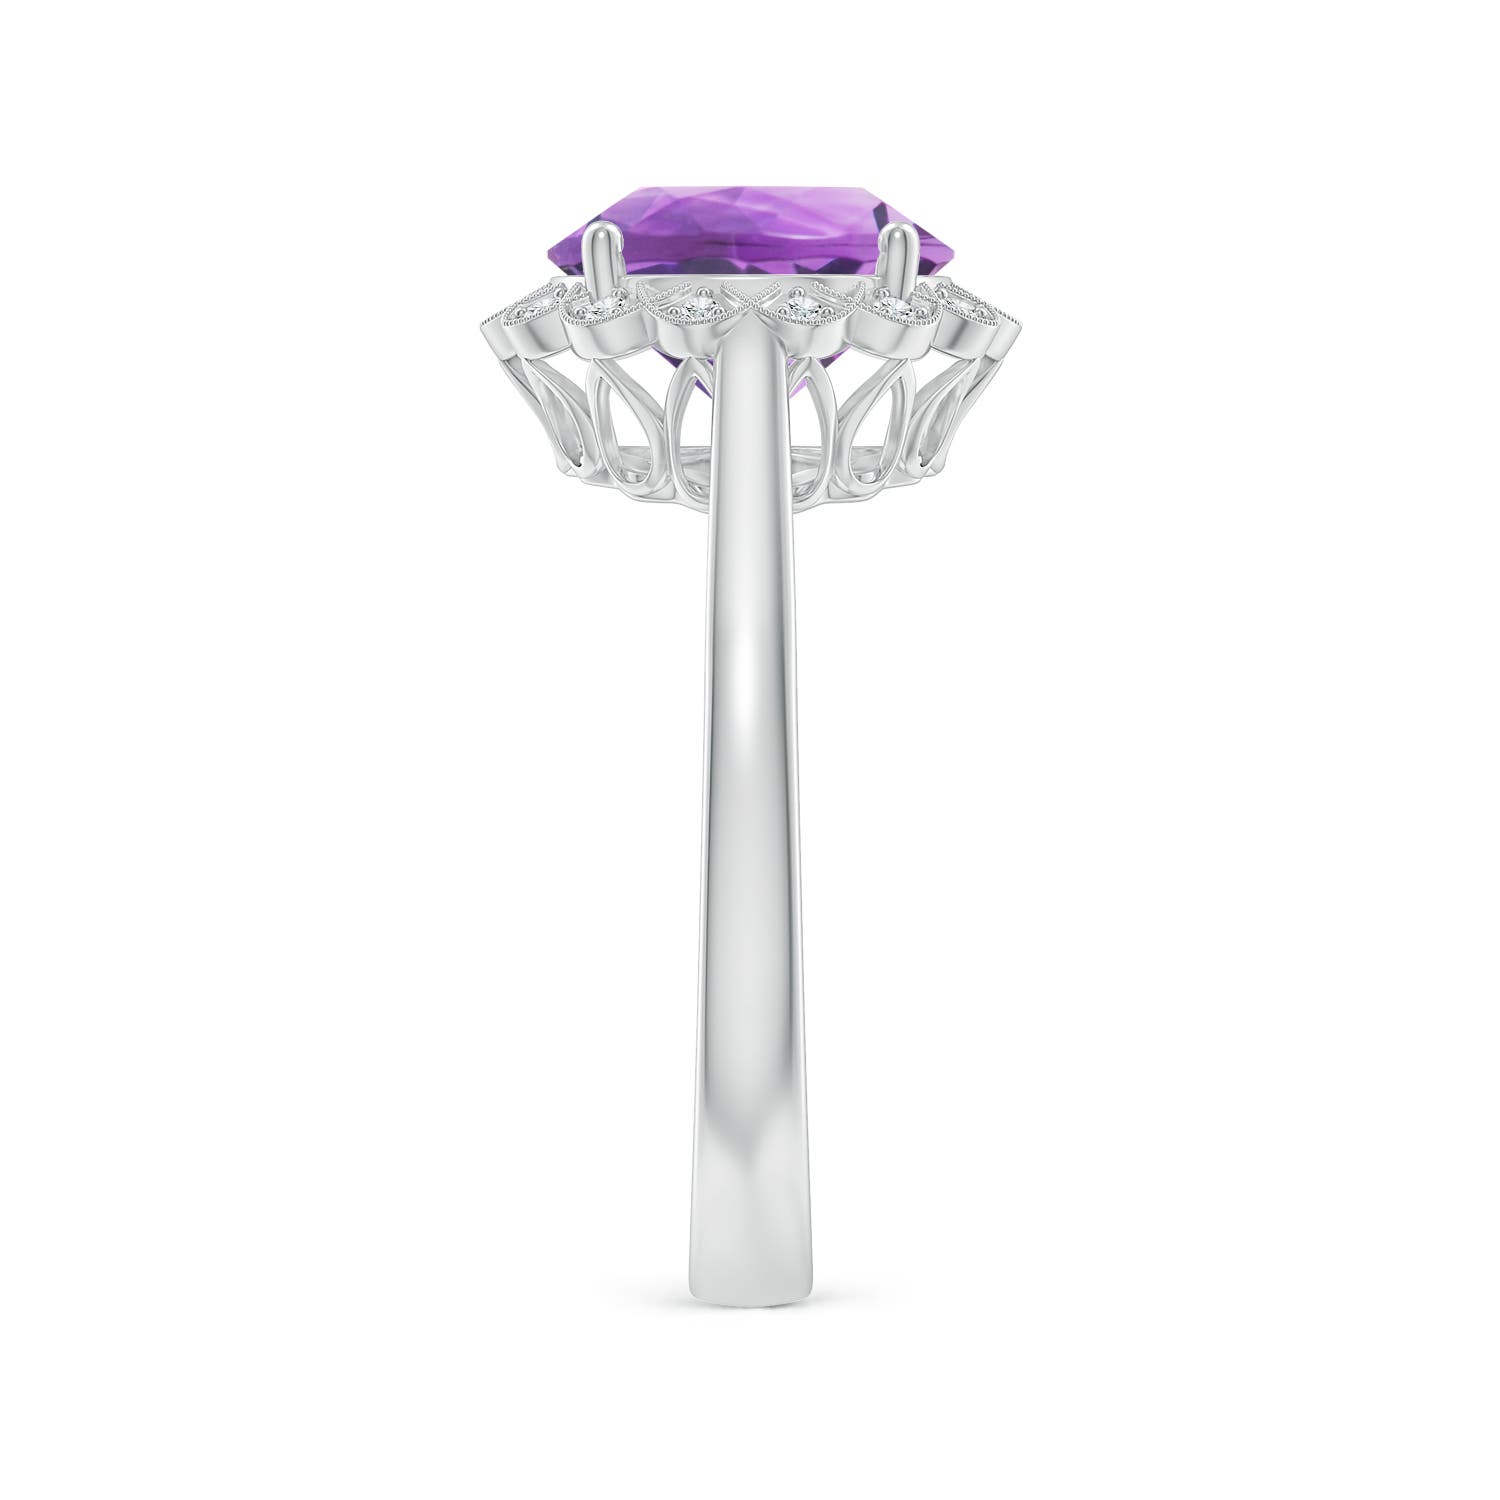 A- Amethyst / 2.52 CT / 14 KT White Gold